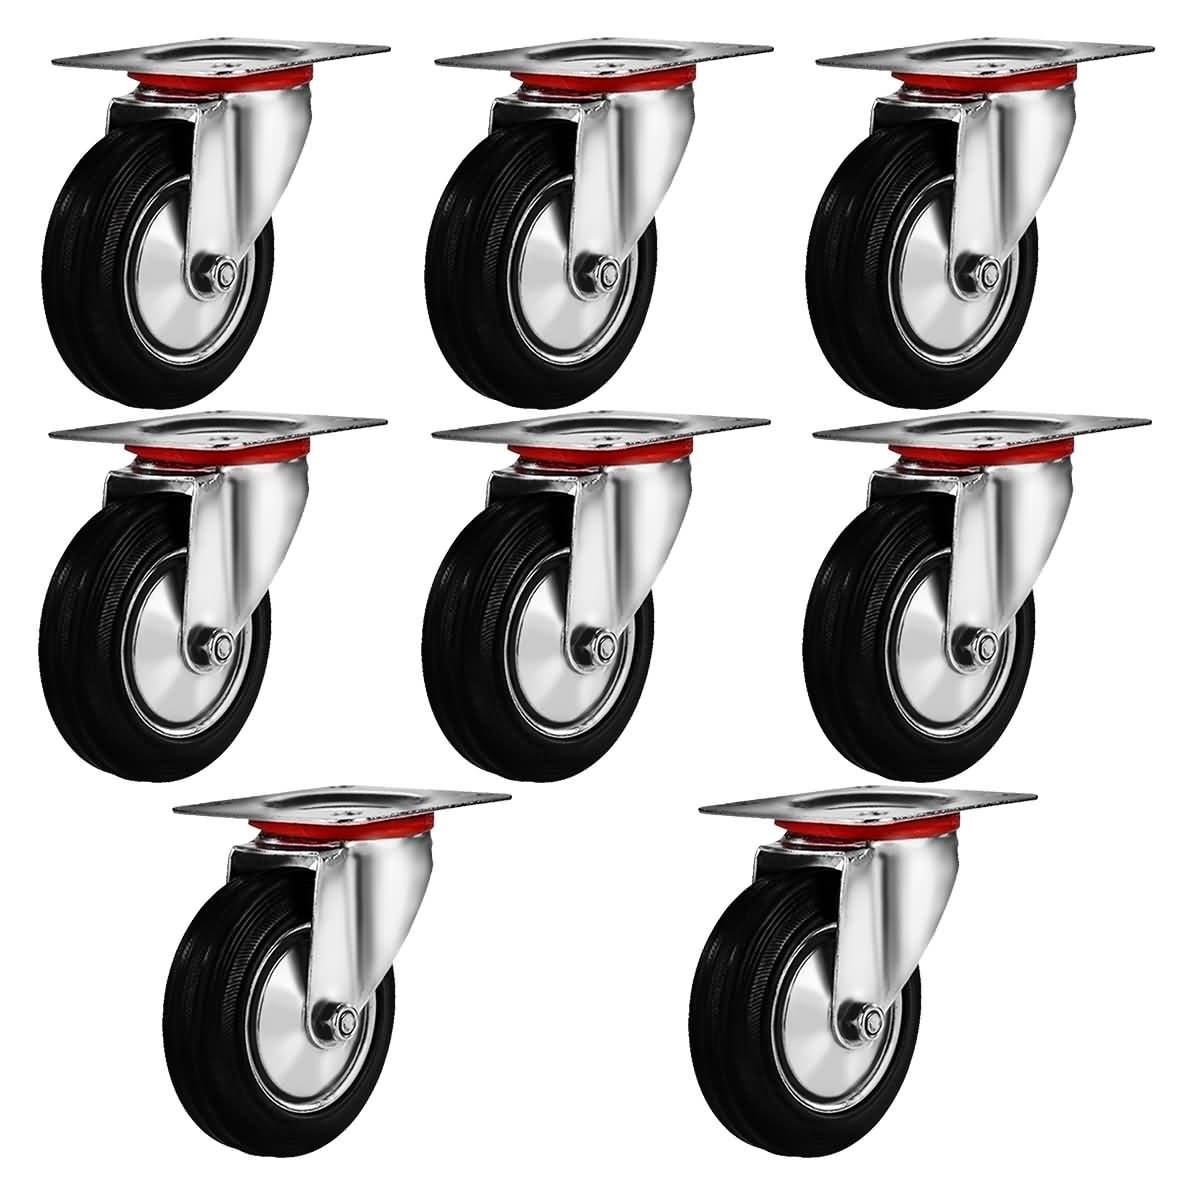 12 pack swivel caster wheels 3" rubber base with top plate bearing heavy duty 